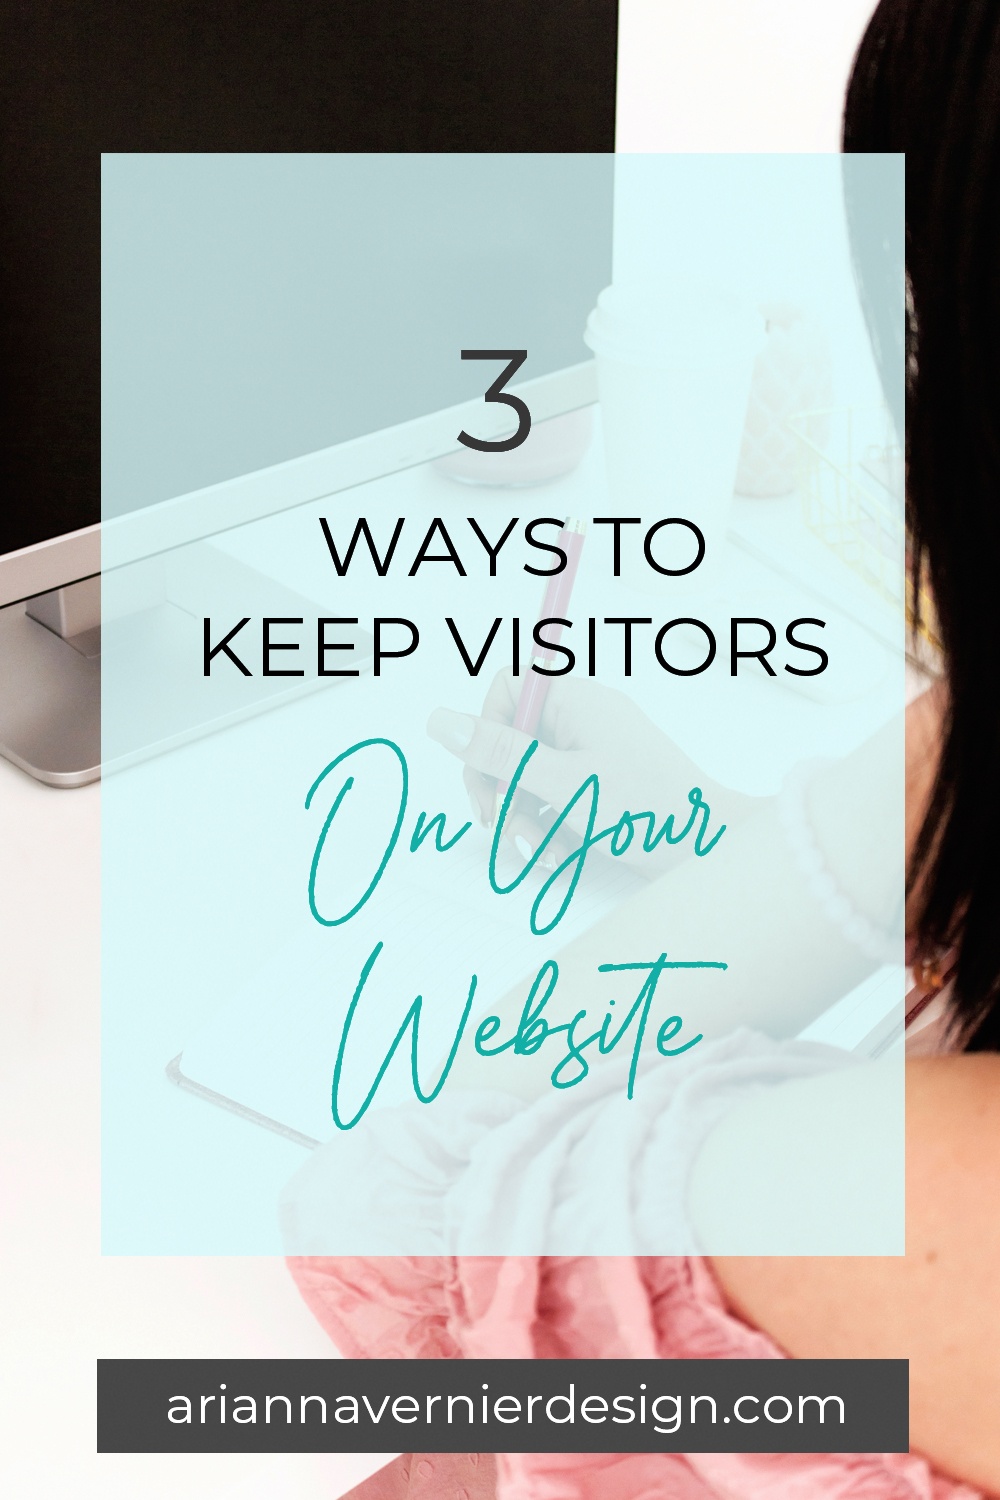 Pinterest pin with girl on computer in background, with a light blue rectangle over top, and the title "3 Ways to Keep Visitors on Your Website"